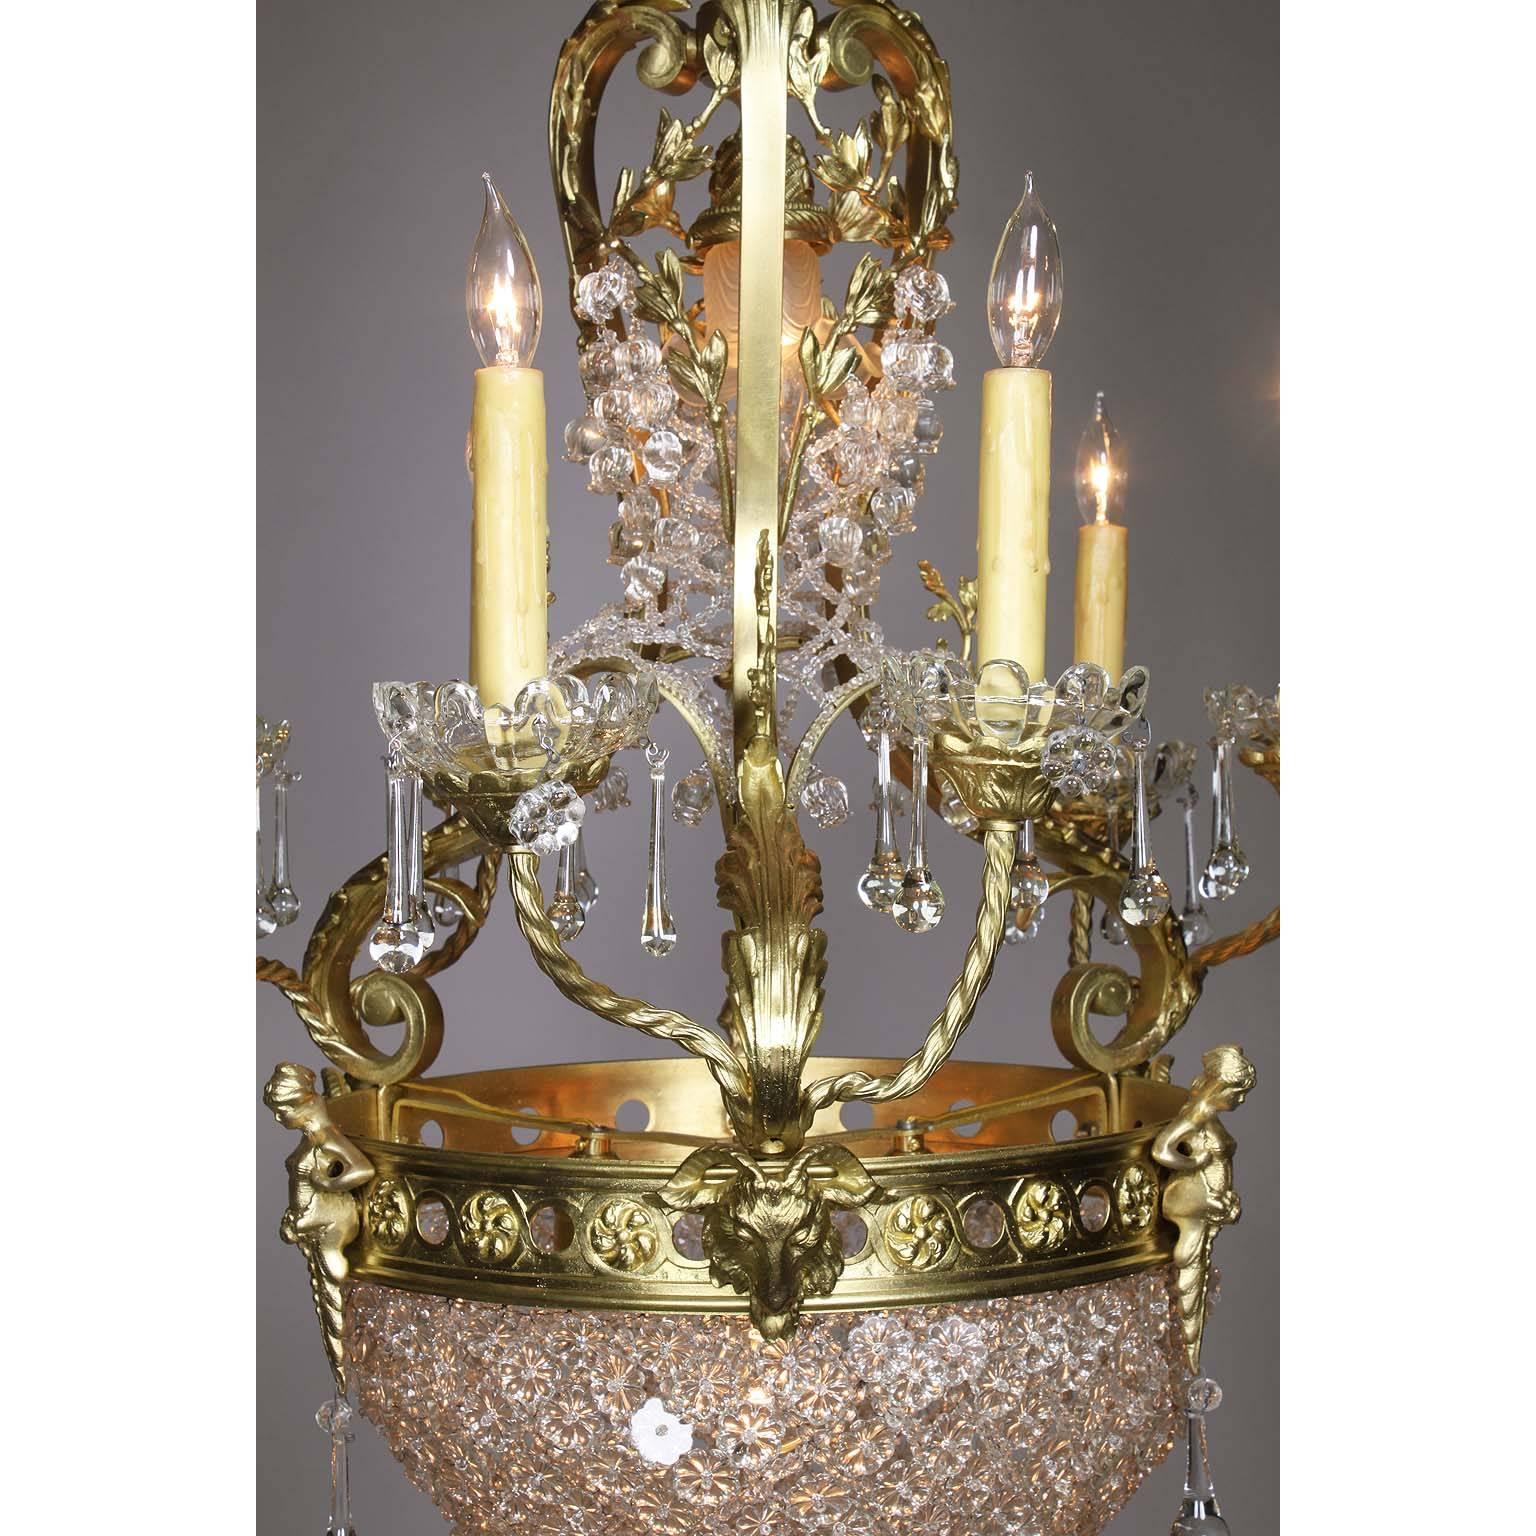 A French Belle Époque gilt bronze and cut-glass six-arm figural basket chandelier. The elongated gilt-bronze frame with six candle-arms with glass wax-drip plates, surmouted with interlaced molded cut-glass flowers, cast bronze figures of